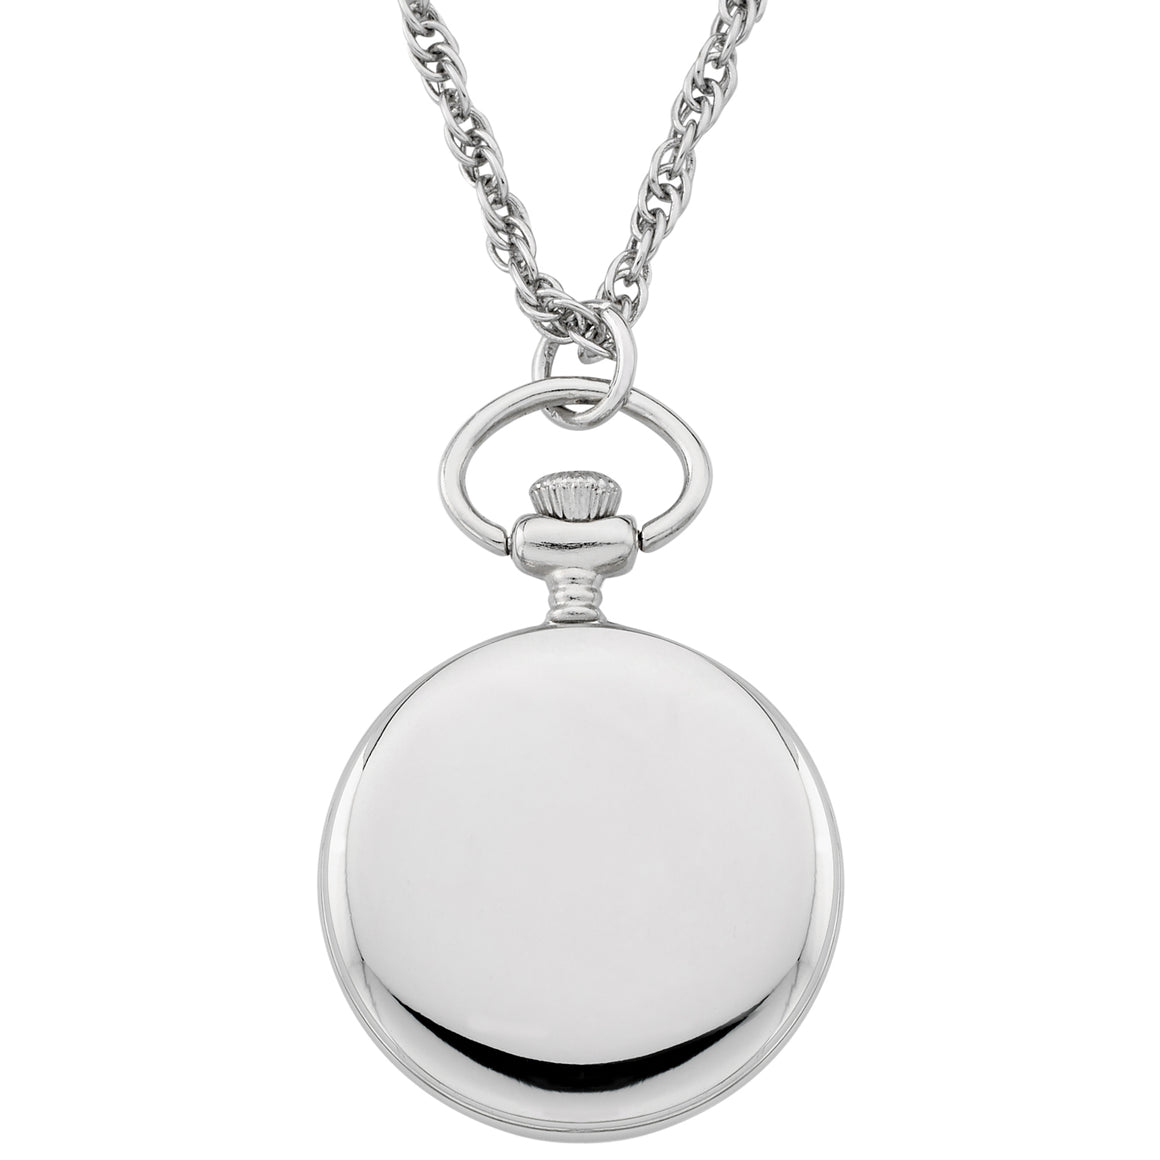 Gotham Women's Silver-Tone Open Face Pendant Watch with Chain # GWC14140SR